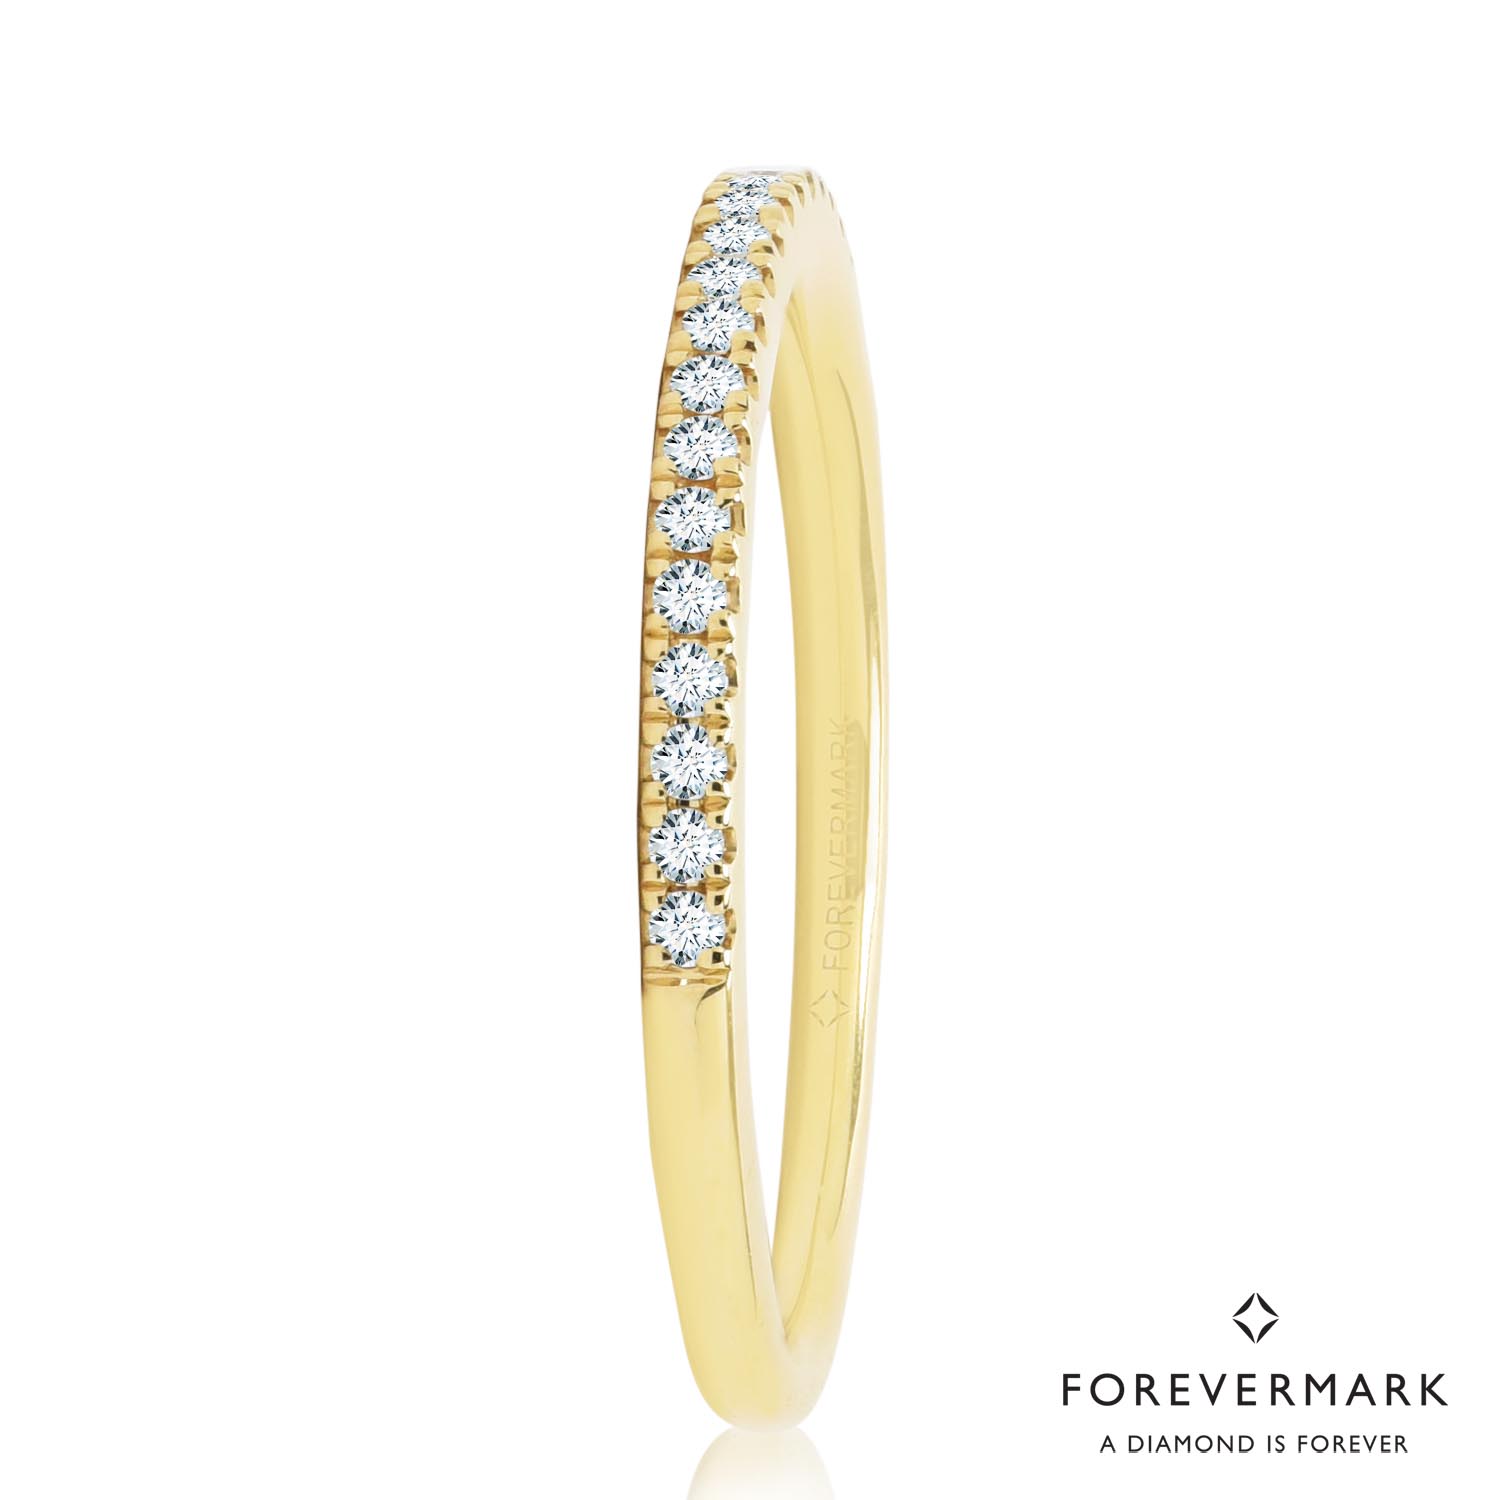 De Beers Forevermark Petite Micro Pave Comfort Fit Diamond Band in 18kt Yellow Gold (1/7ct tw)